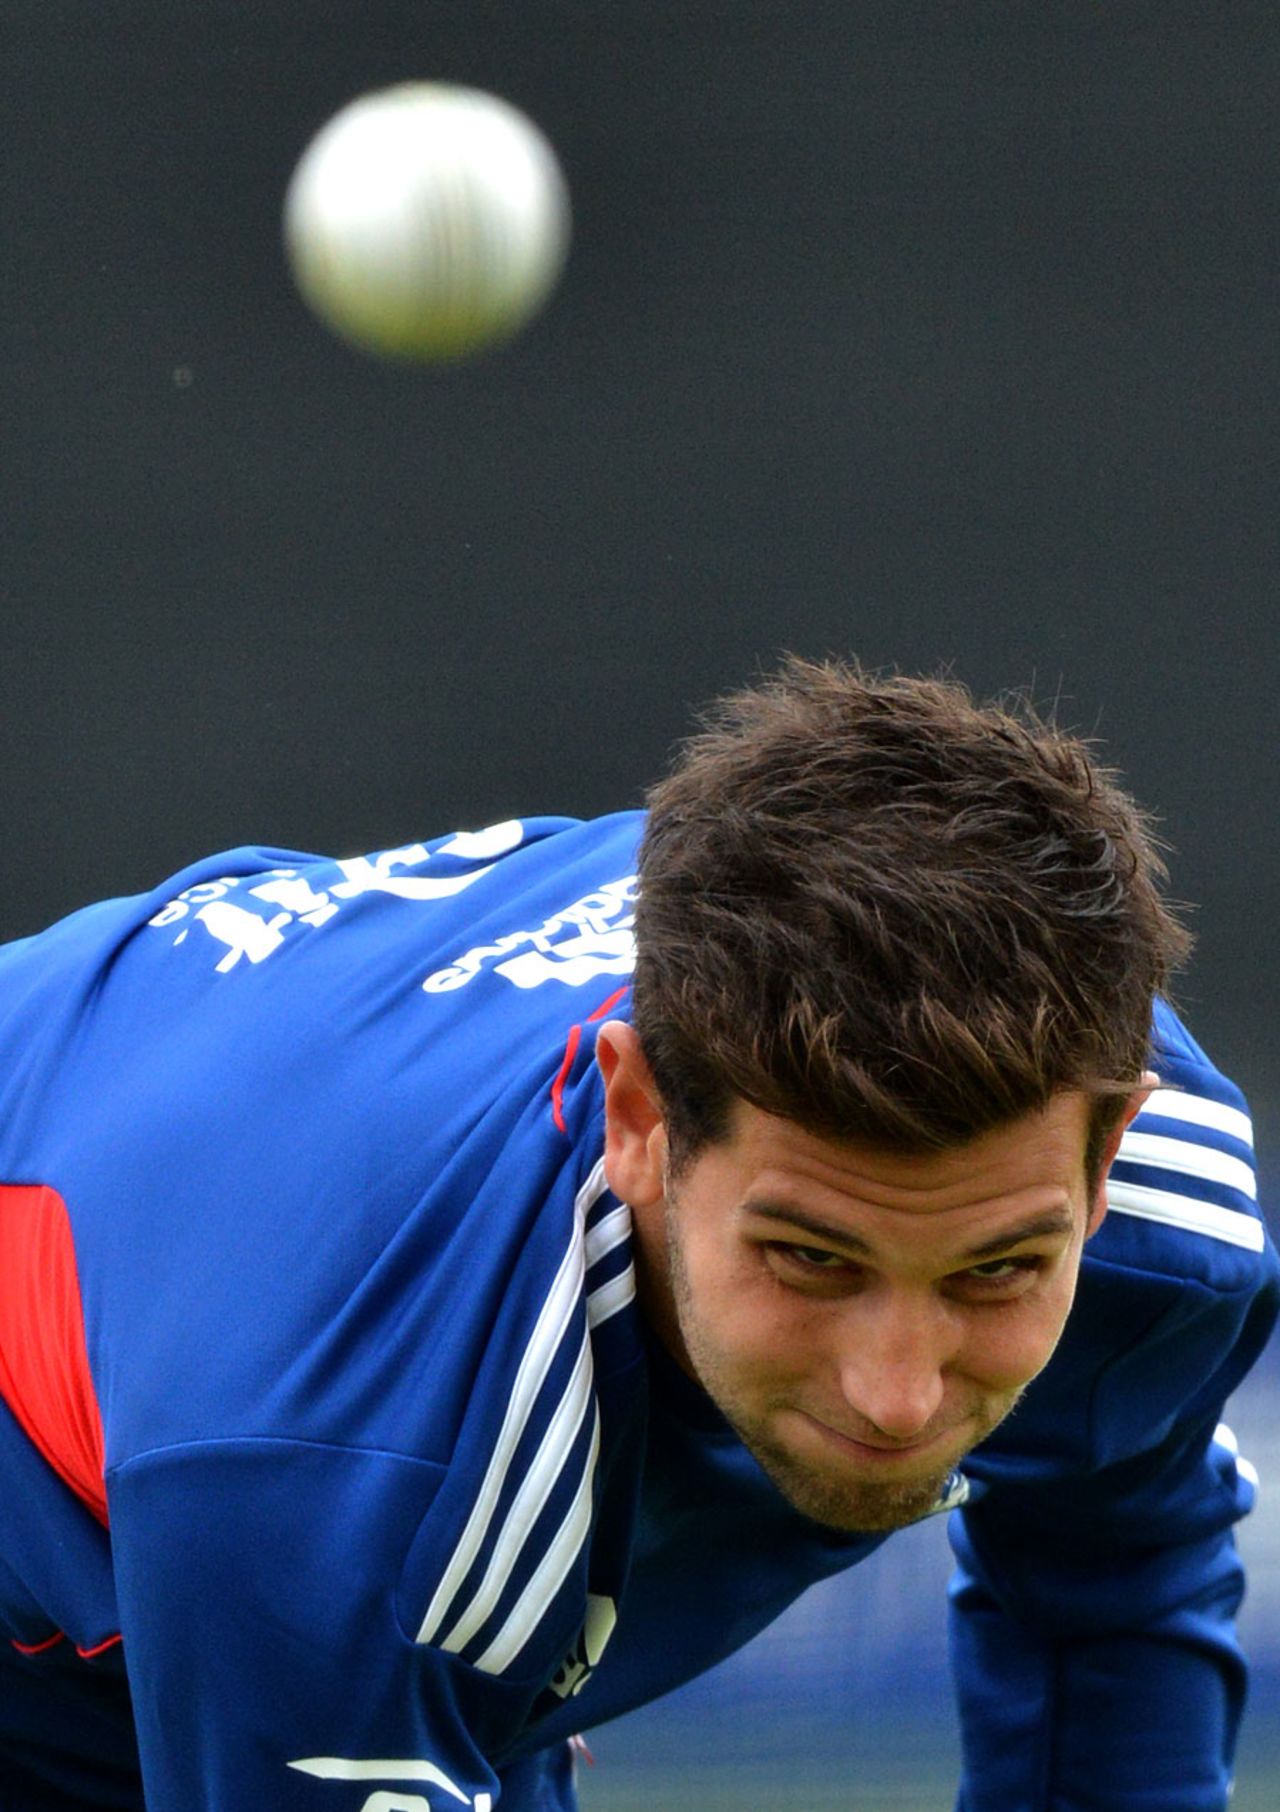 Jade Dernbach was added to England's ODI squad as cover for Tim Bresnan, Lord's, May 30, 2013